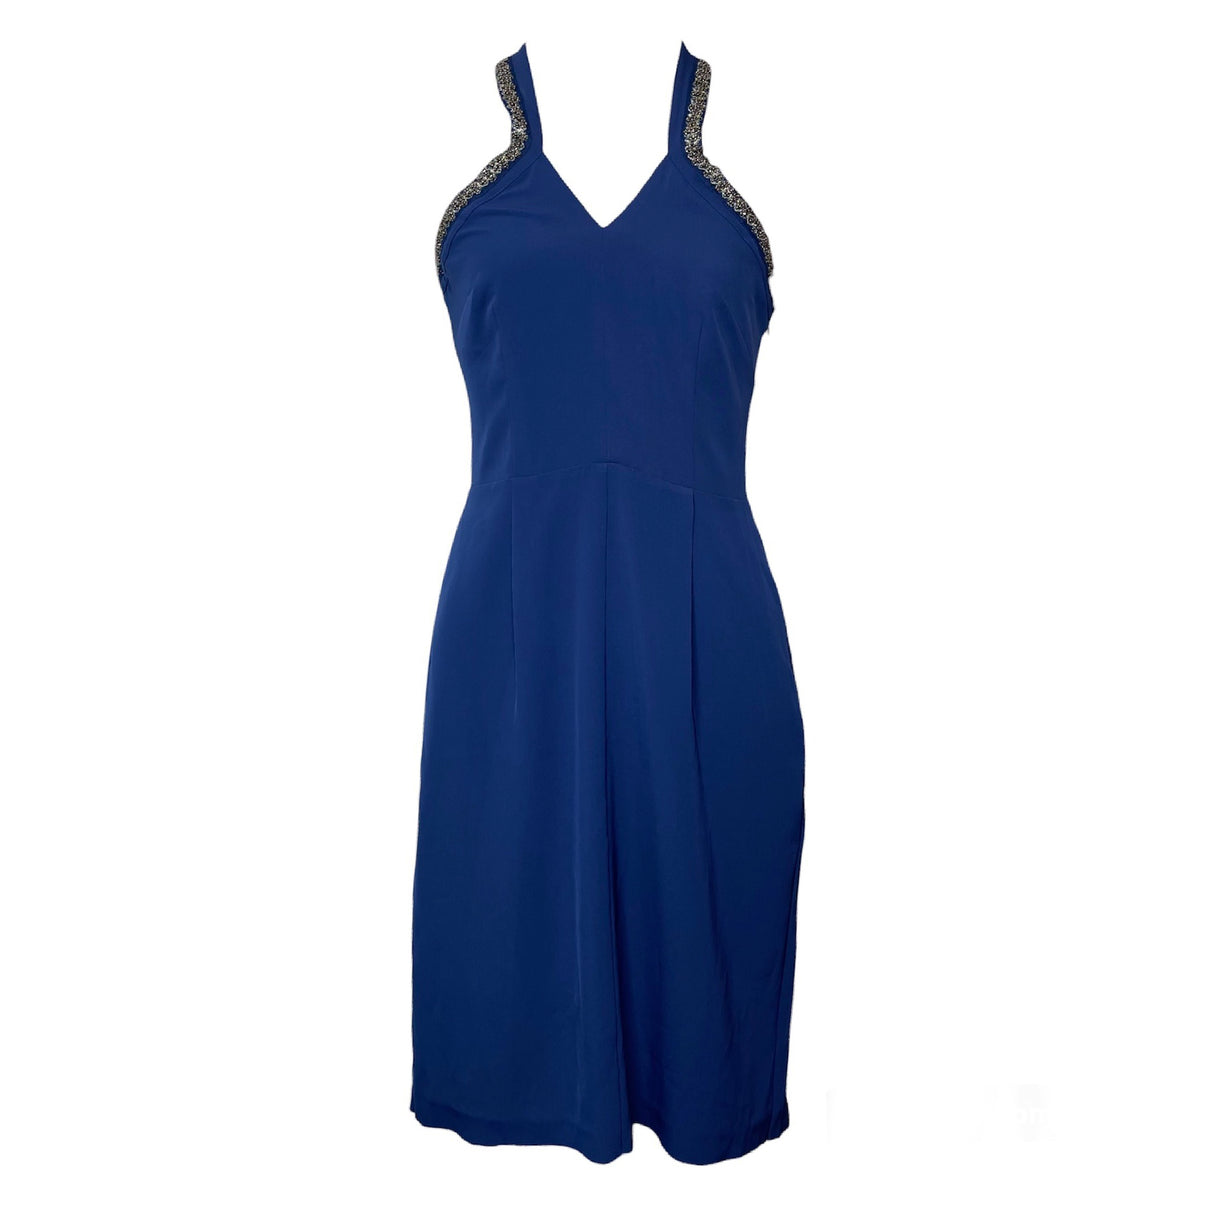 A Second Chance - Spotlight By Warehouse Dress Blue 36 Women - Delivery All Over Lebanon